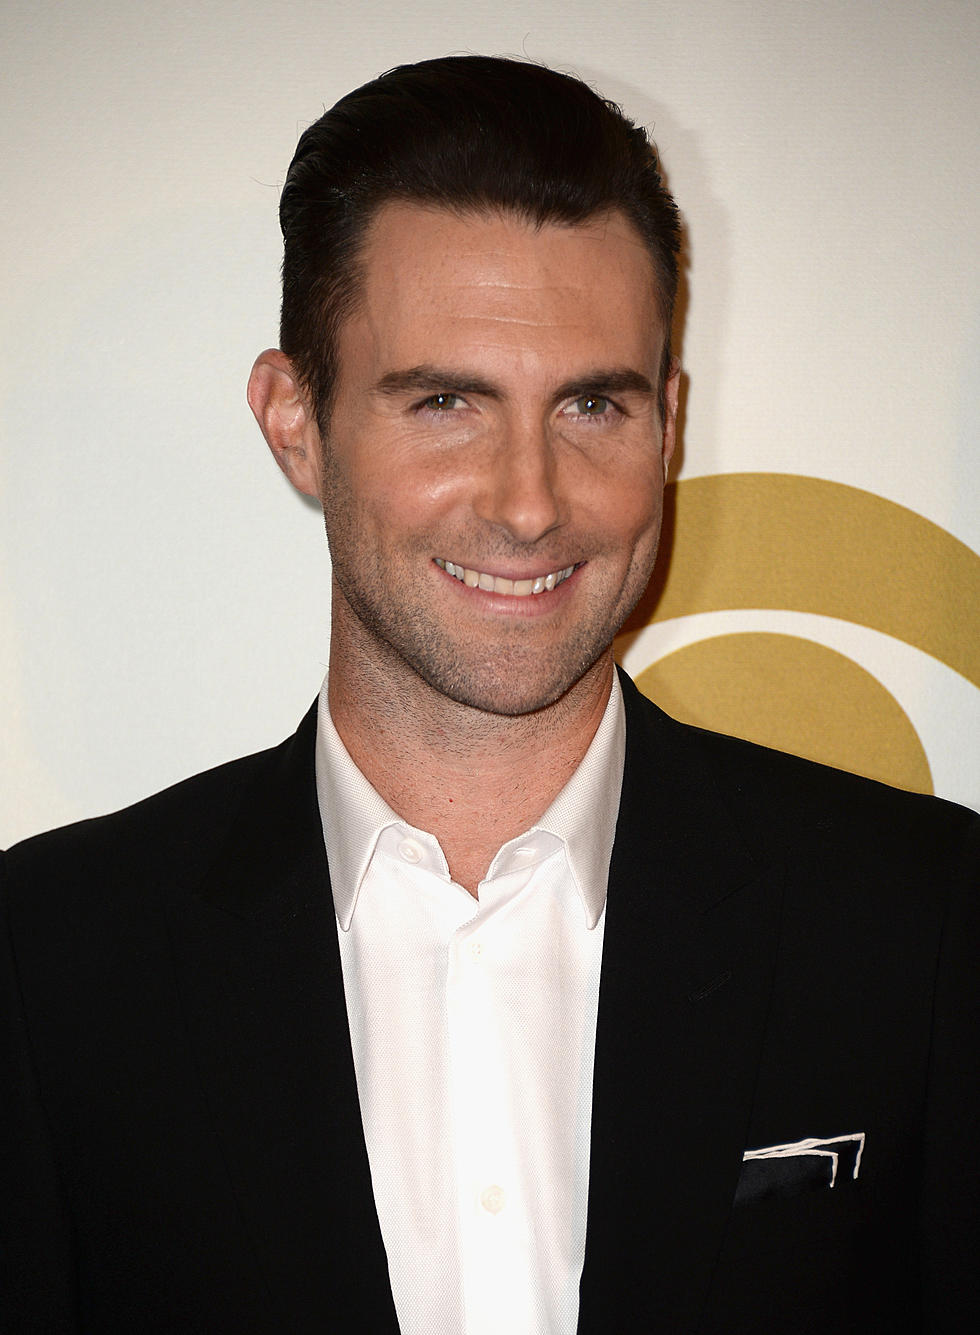 Adam Levine Surprises 3-Year-Old Girl Who Cried When She Found Out He Was Married [Video]